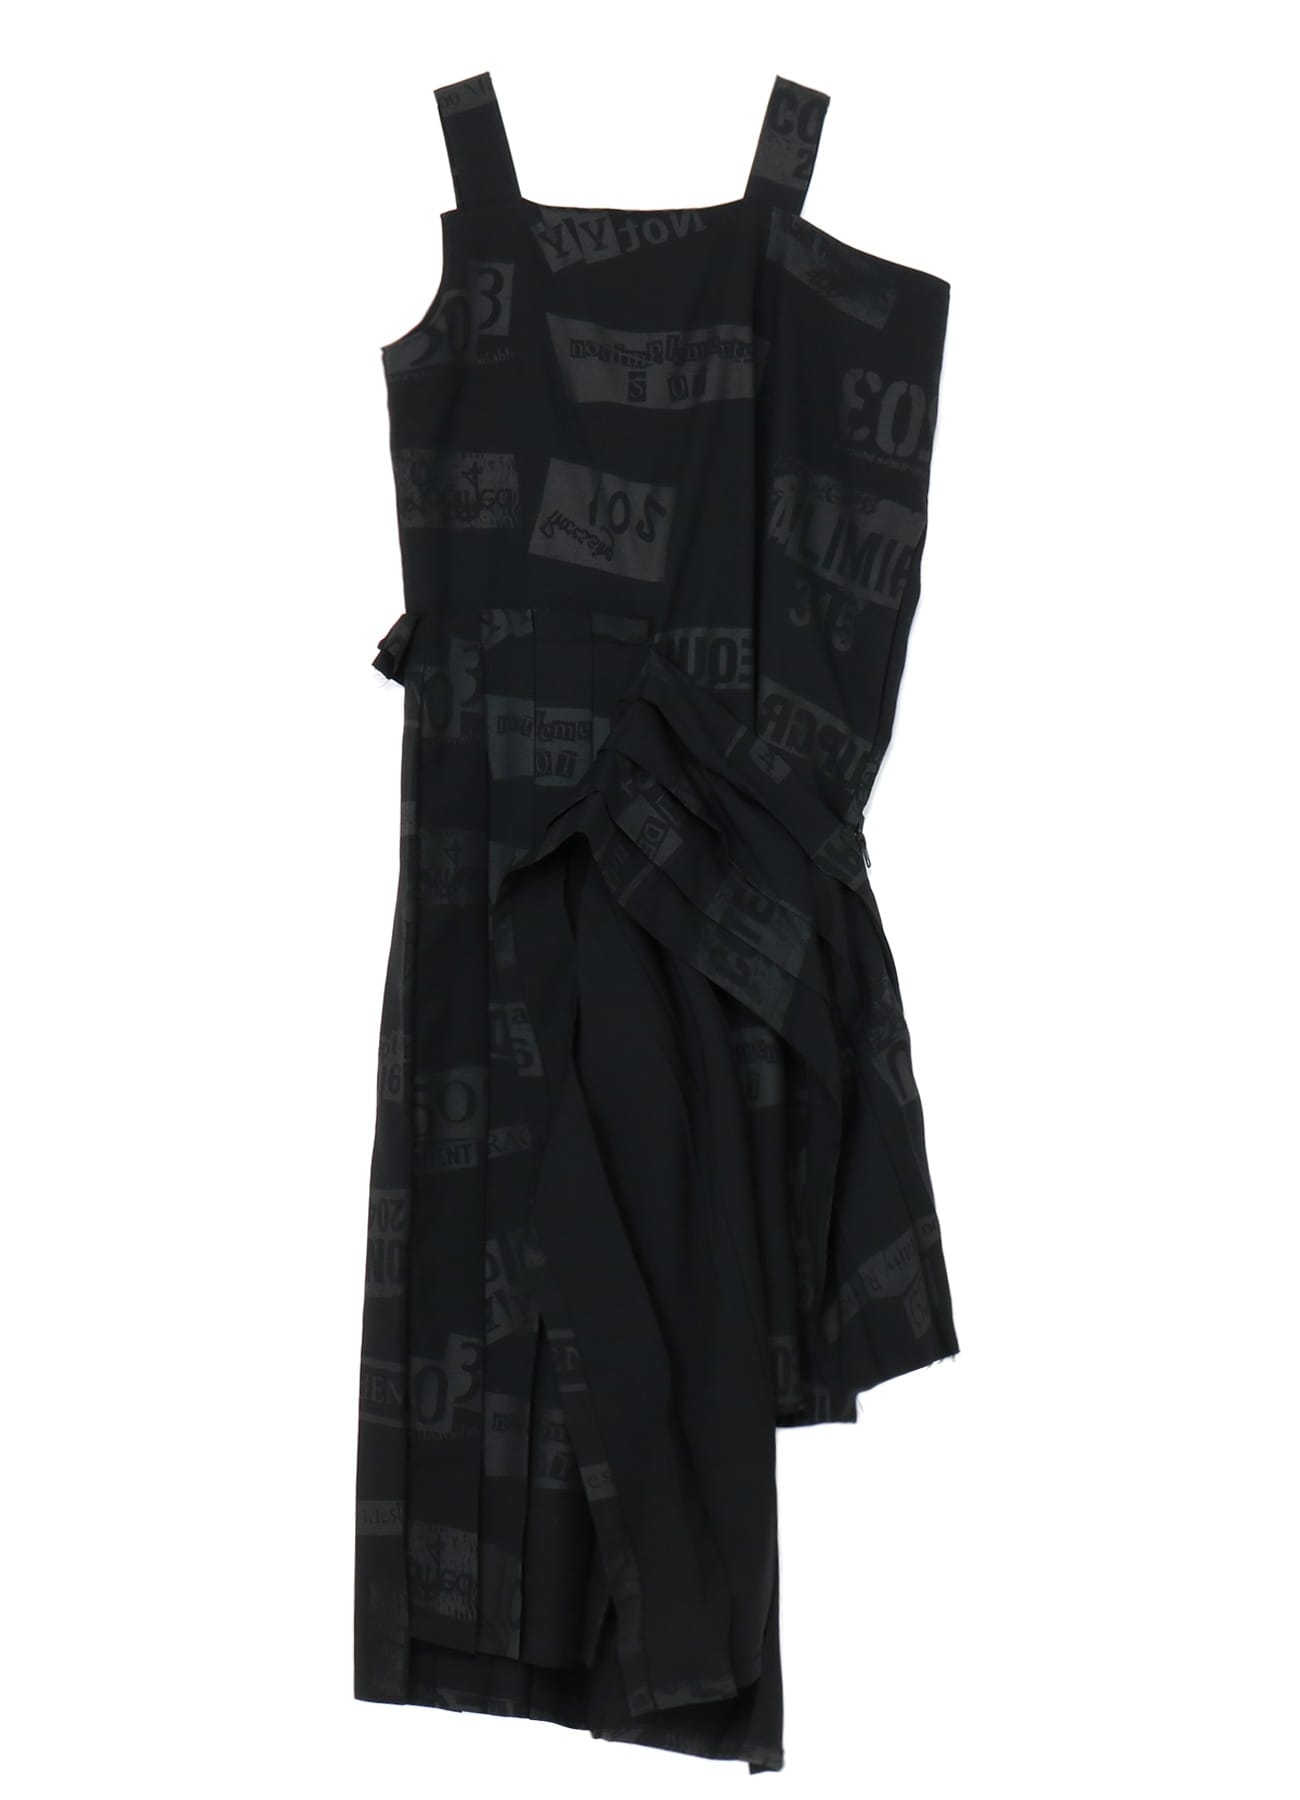 PRINTED SERGE DRESS WITH PLEATED SKIRT